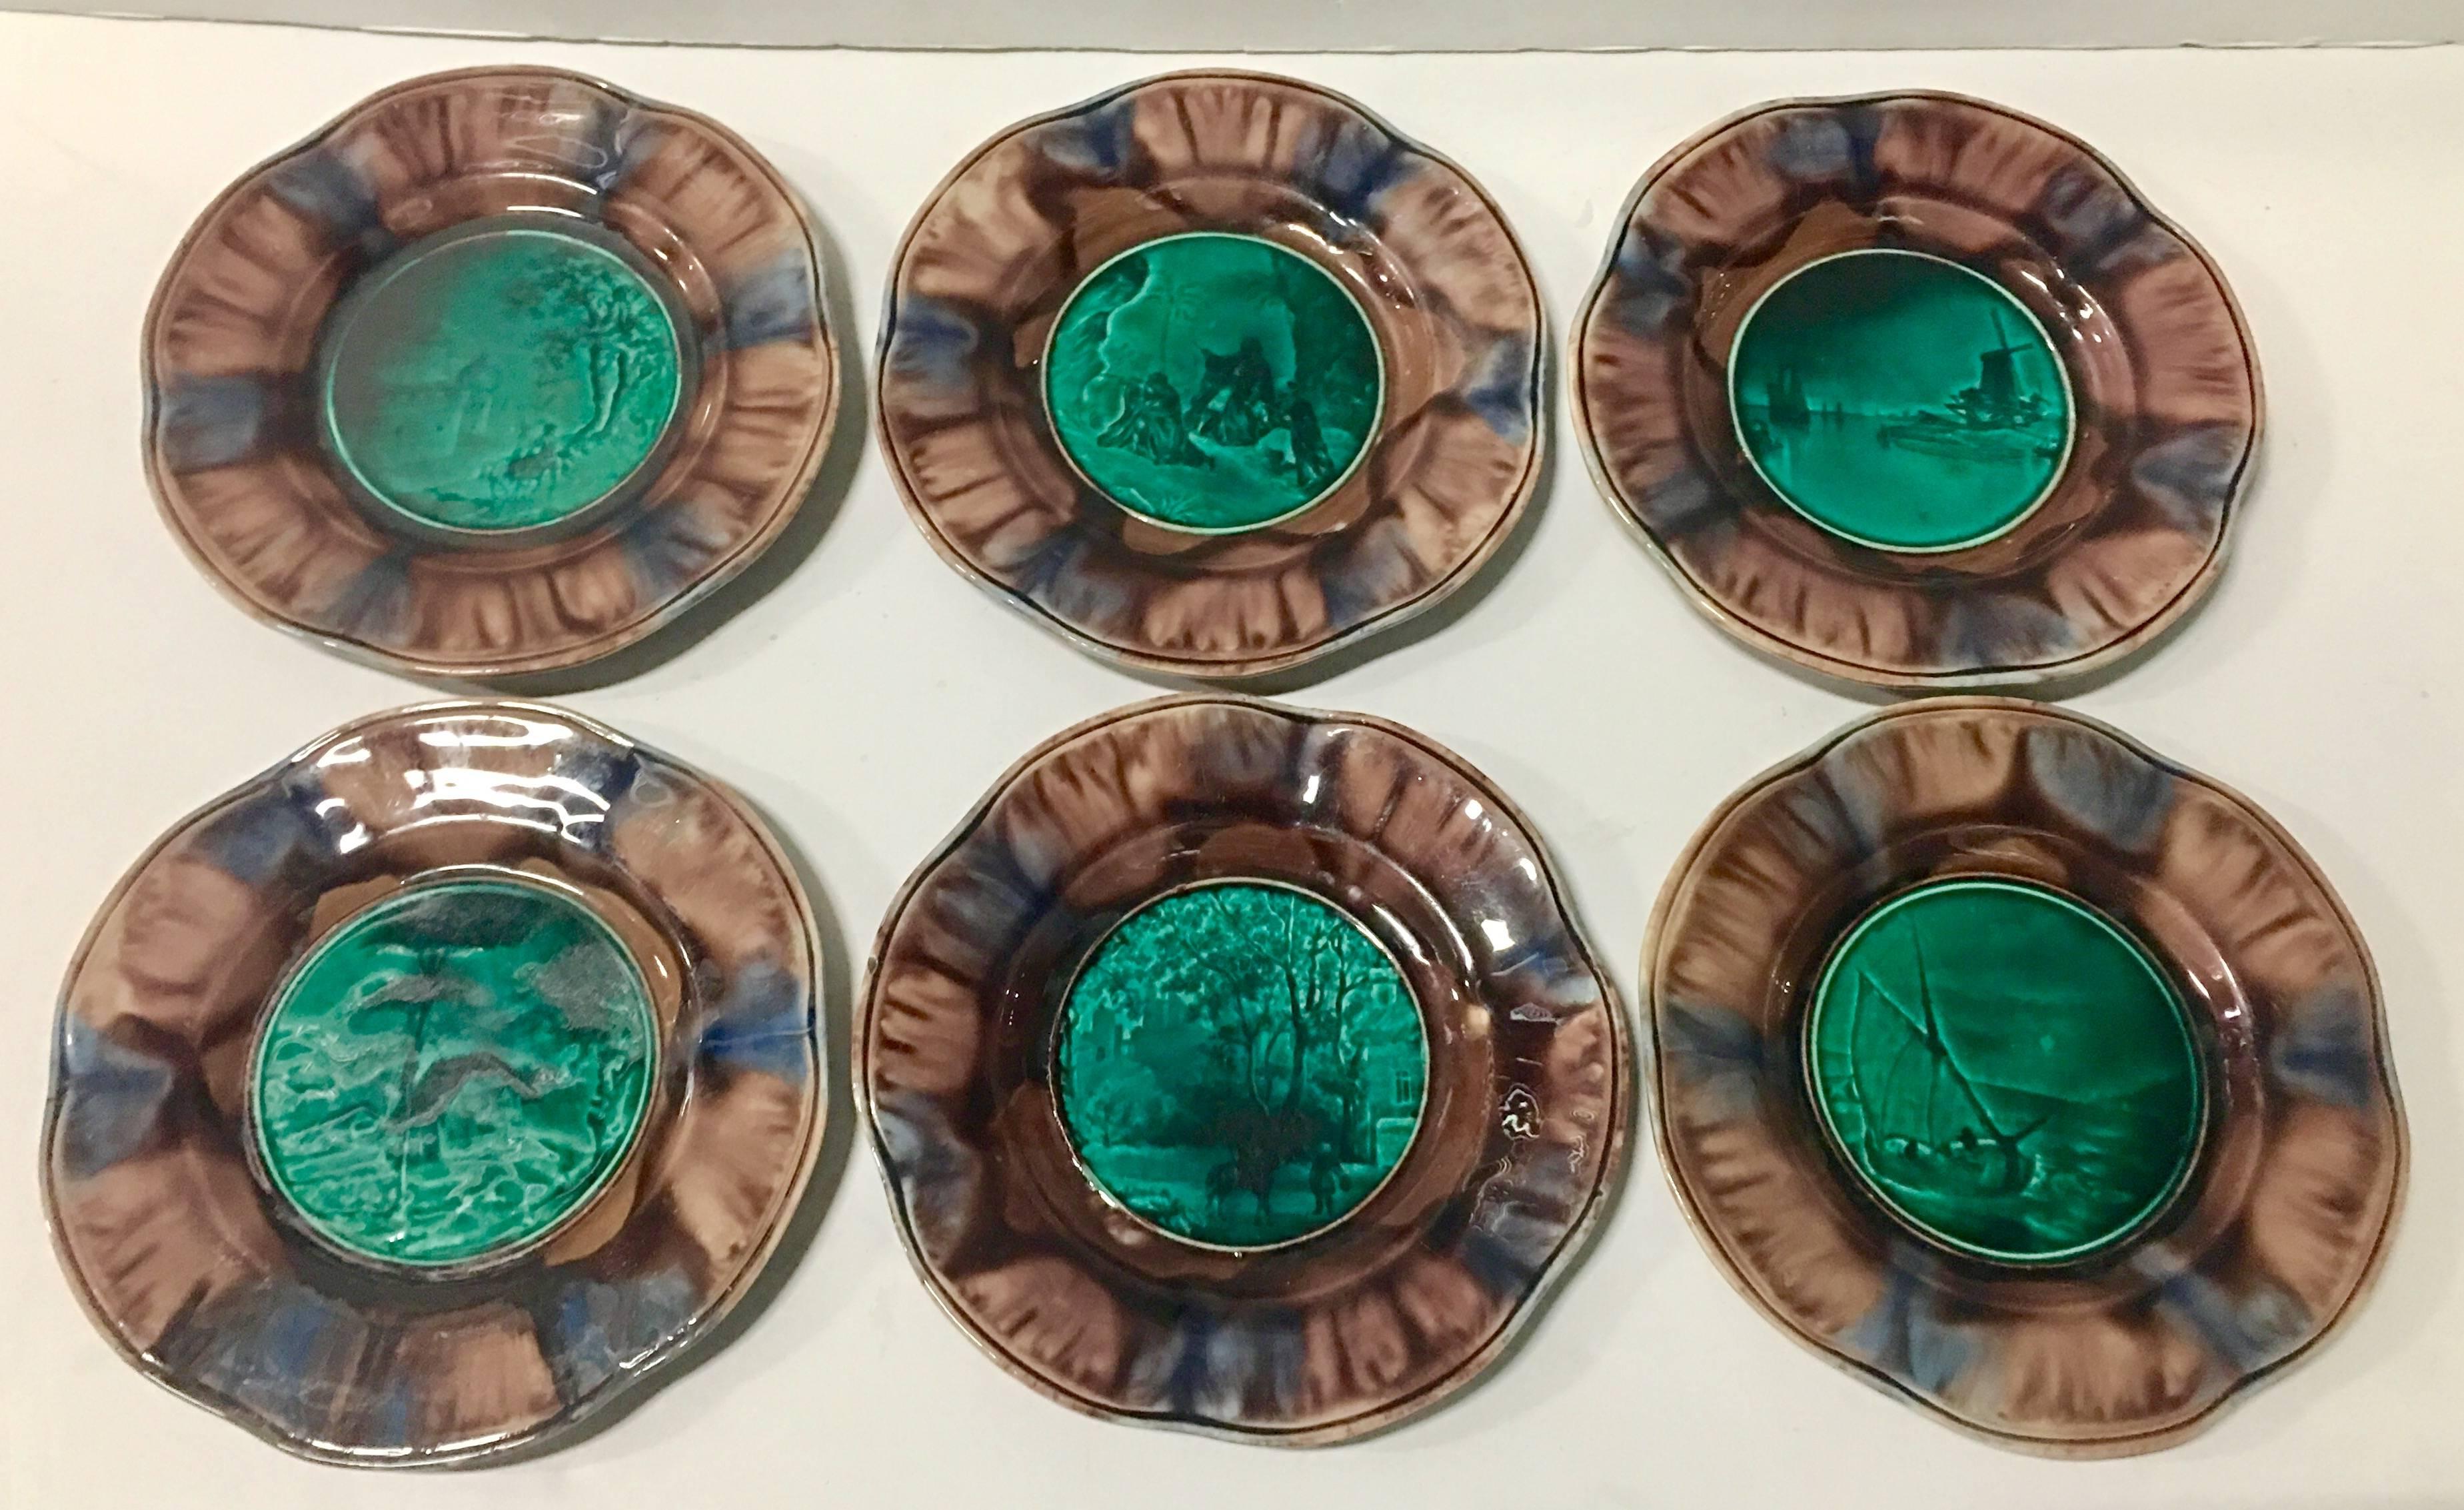 Rare circa 1840s French Rubelles Majolica collector plates, set of six. Set includes six plates, all with a different central motif, landscape and home, three wise men, sail boat, boat, nomad, man on horse with arabesque style home in background and